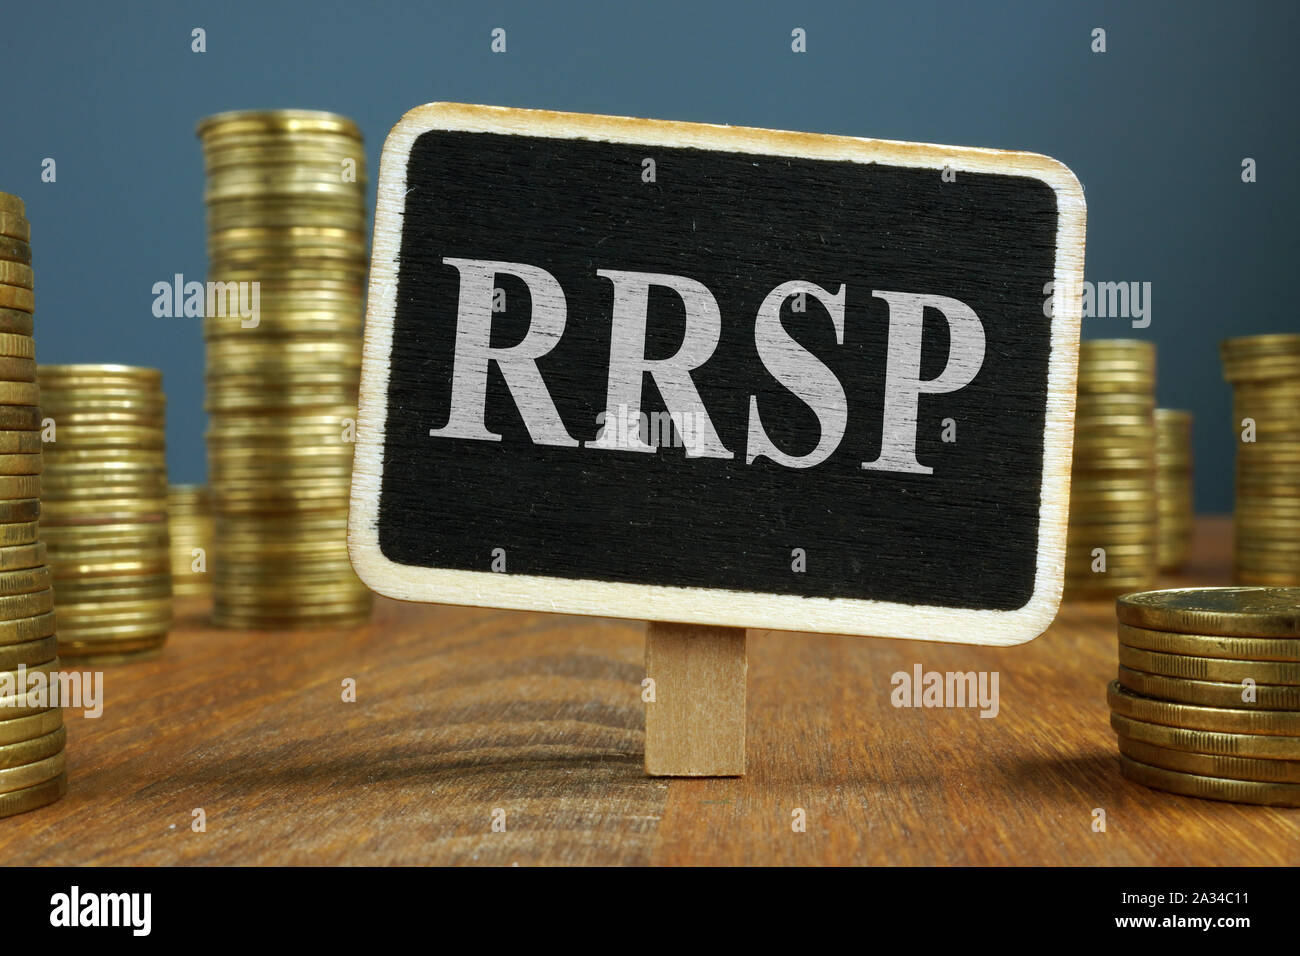 RRSP Registered Retirement Saving Plan and stacks of coins. Stock Photo